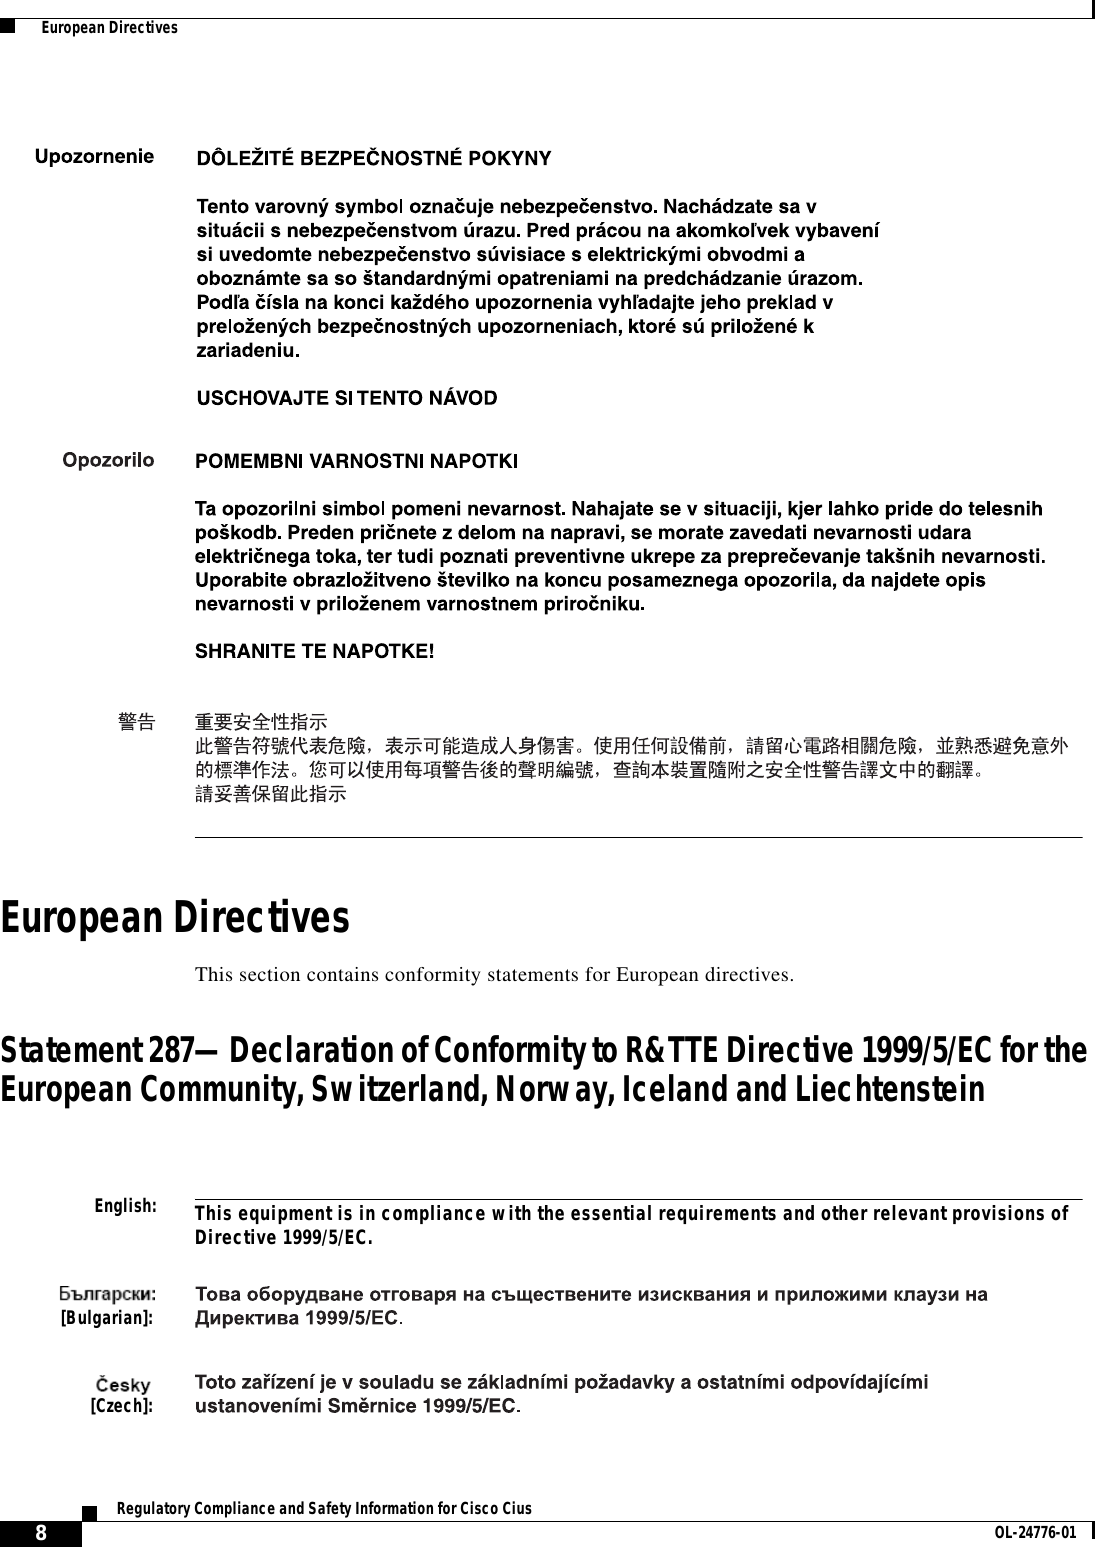  8Regulatory Compliance and Safety Information for Cisco Cius OL-24776-01  European DirectivesEuropean DirectivesThis section contains conformity statements for European directives.Statement 287—Declaration of Conformity to R&amp;TTE Directive 1999/5/EC for the European Community, Switzerland, Norway, Iceland and LiechtensteinEnglish:This equipment is in compliance with the essential requirements and other relevant provisions of Directive 1999/5/EC.[Bulgarian]: [Czech]: 